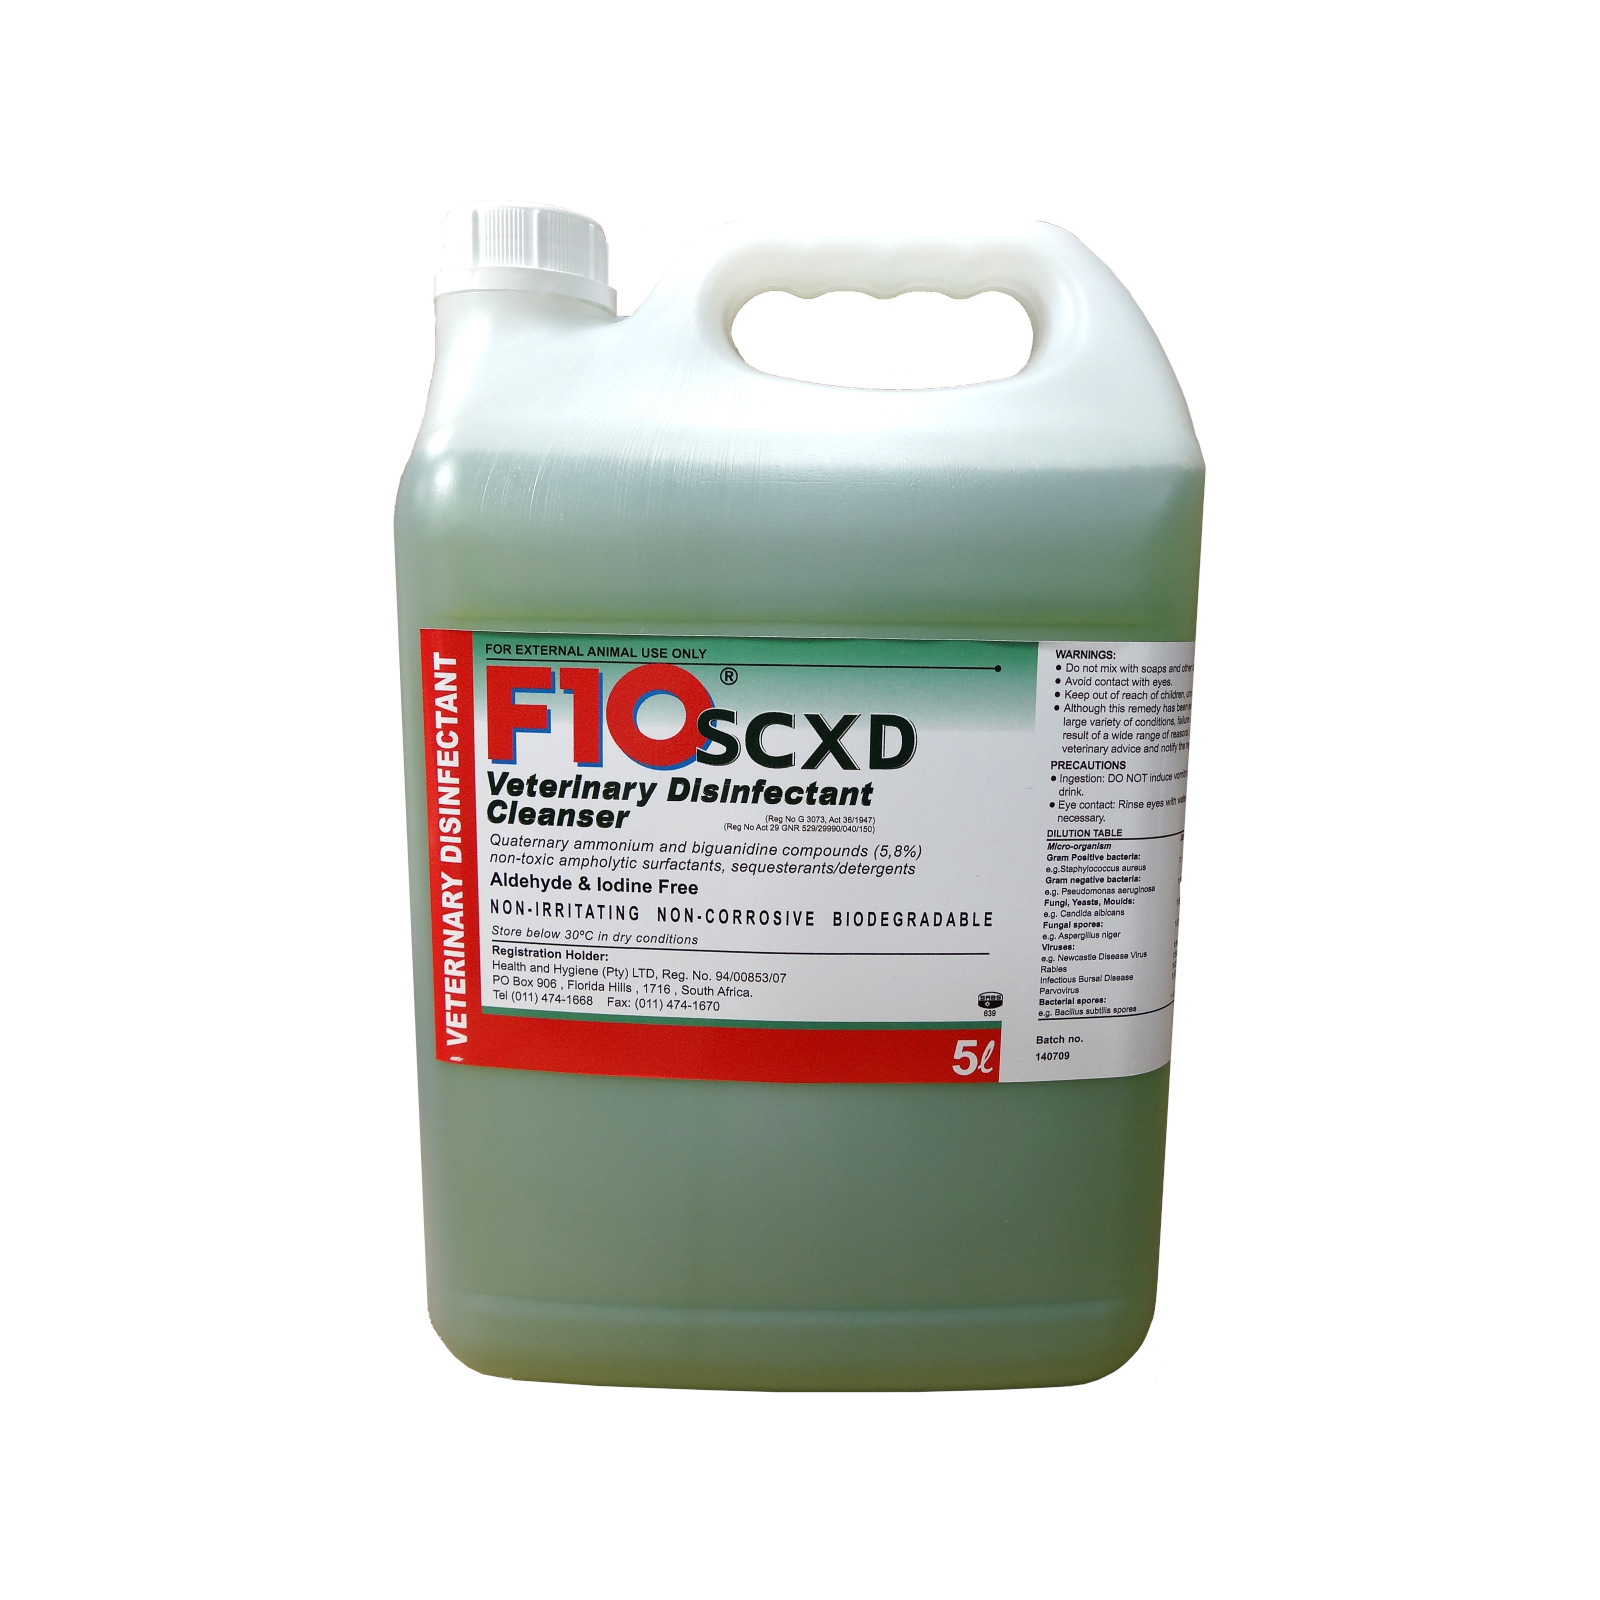 A 5 litre bottle of F10SCXD Veterinary Disinfectant Cleanser